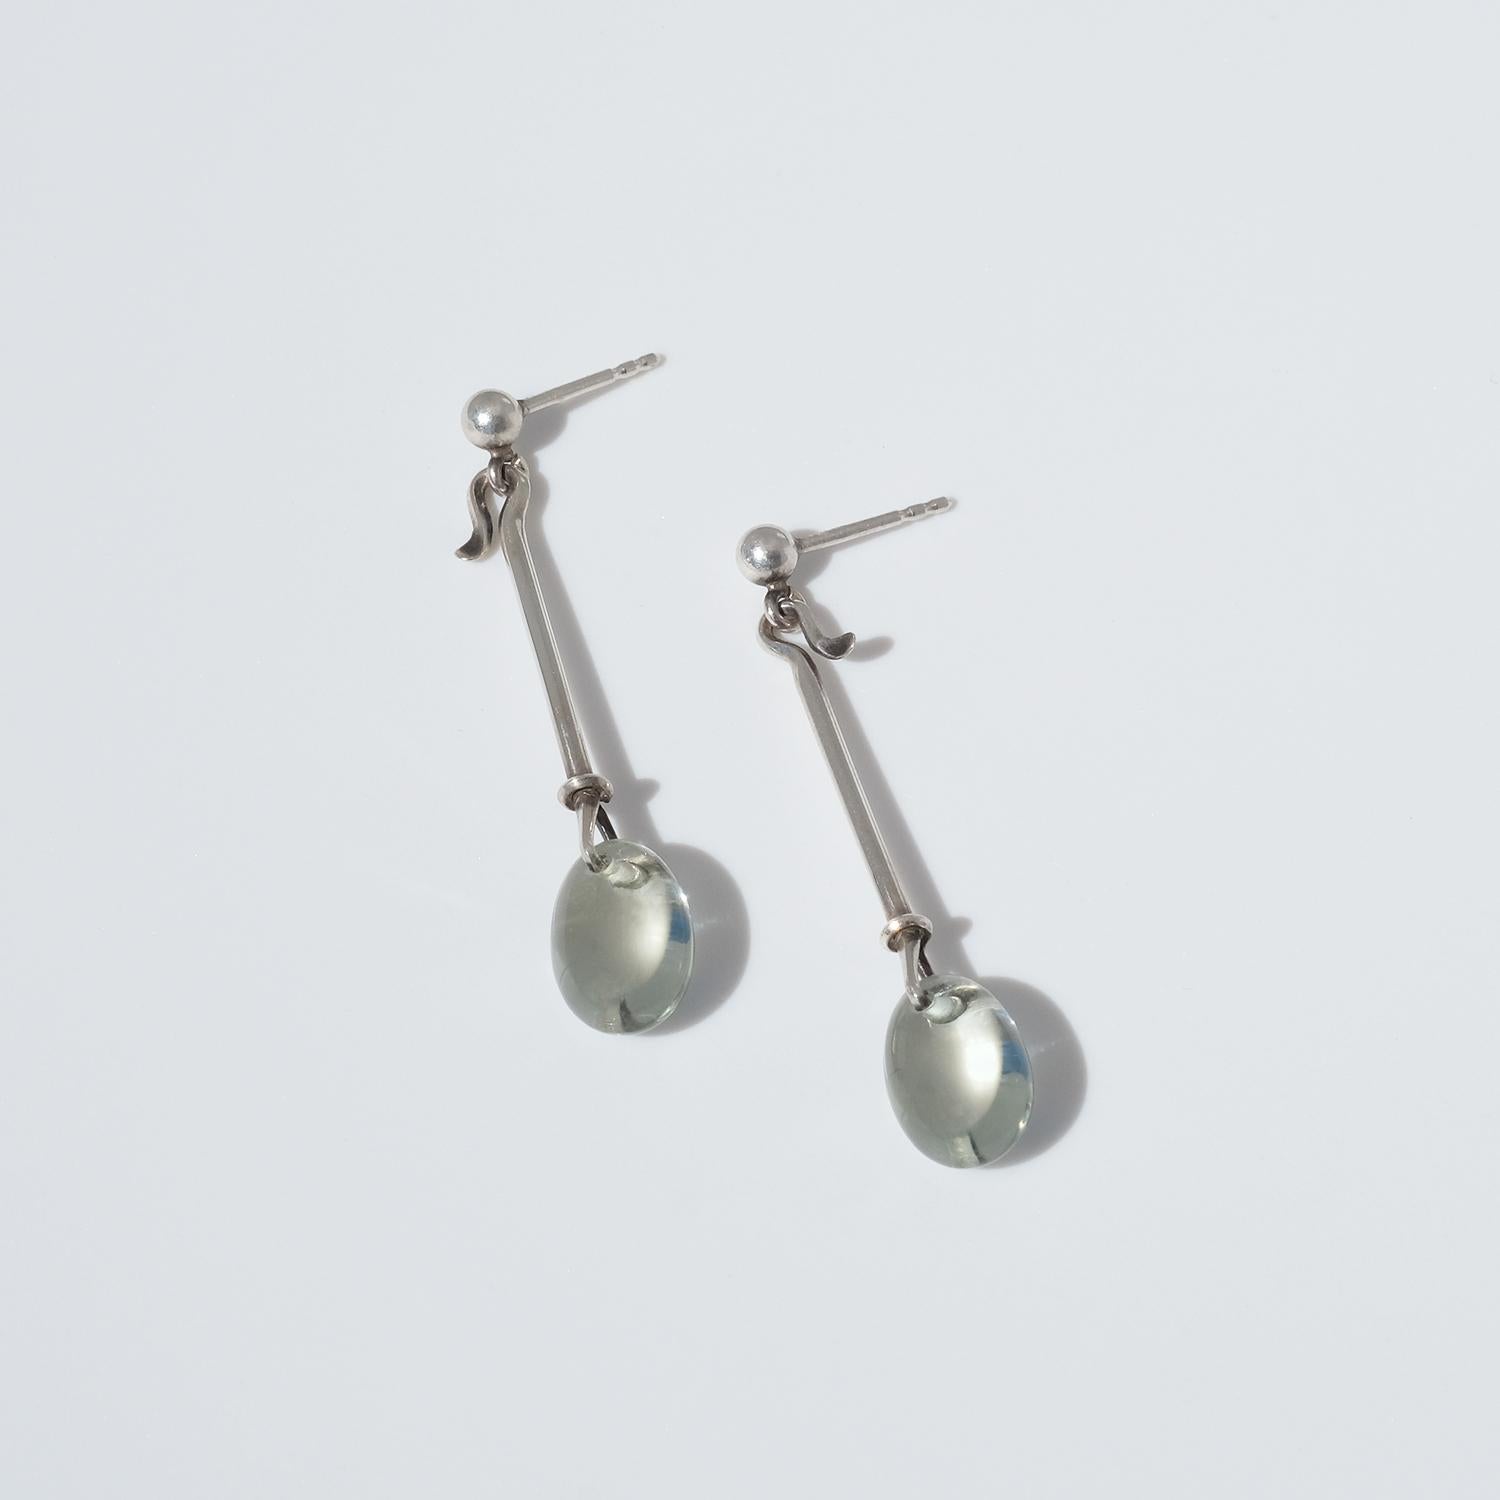 These sterling silver earrings are adorned with polished prasiolite gemstones, a gemstone with a divine greenish color. The earrings are part of Vivianna Torun Bülow Hübe's world known serie Dew Drop, which she designed in the mid 1950s, a